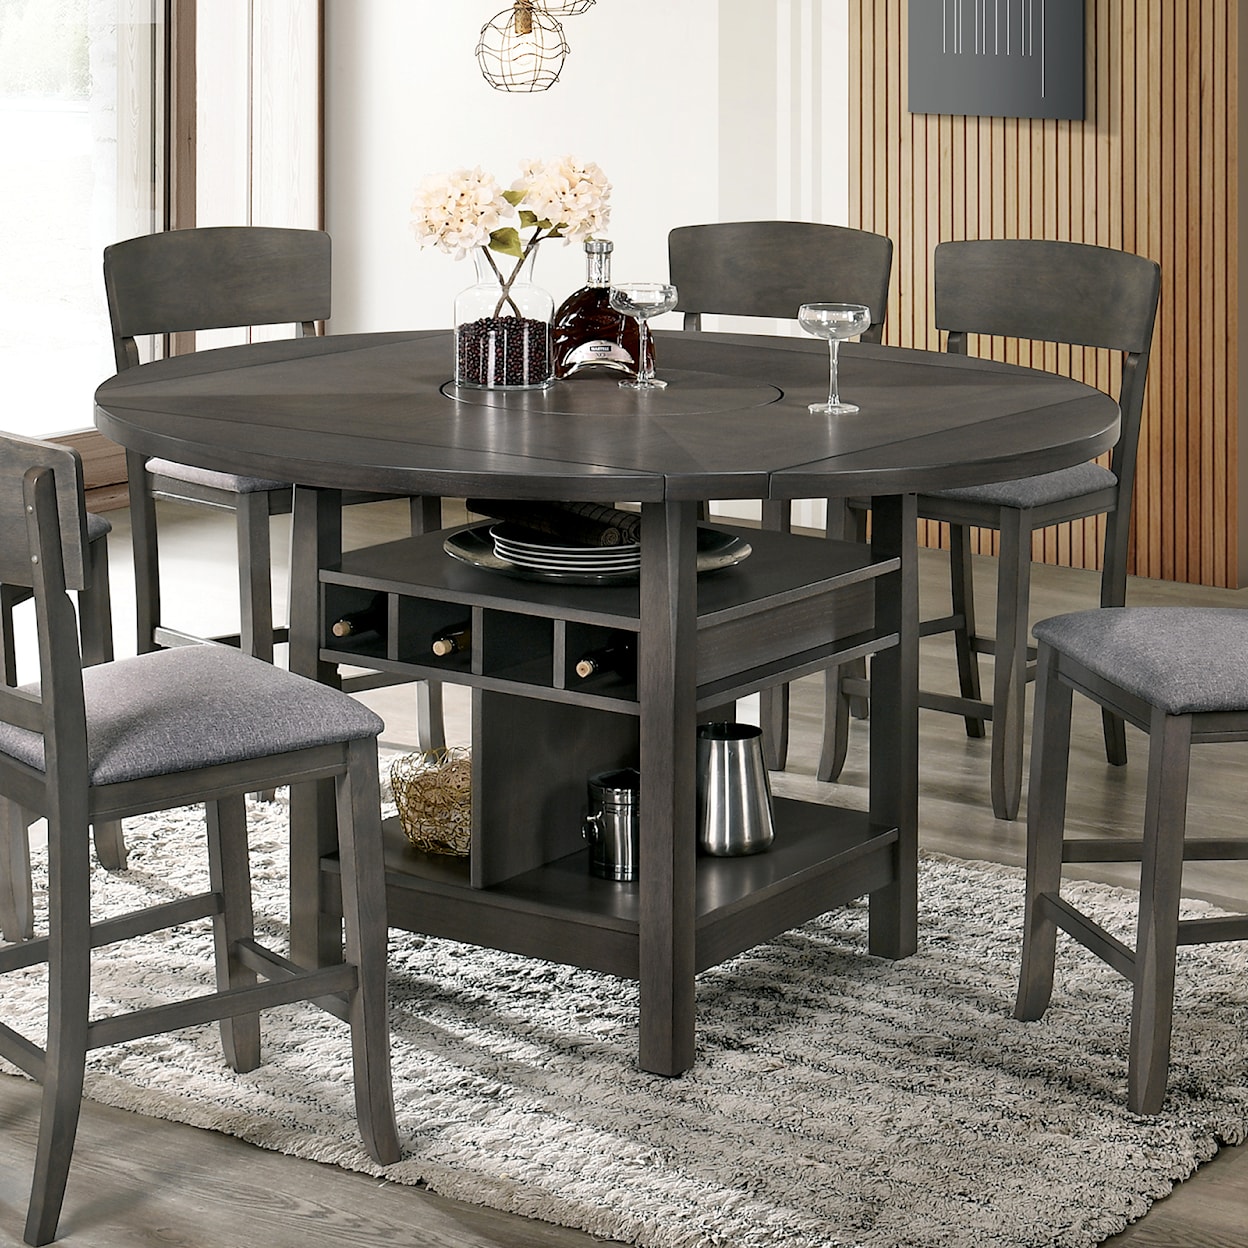 FUSA Stacie Counter Height Dining Table